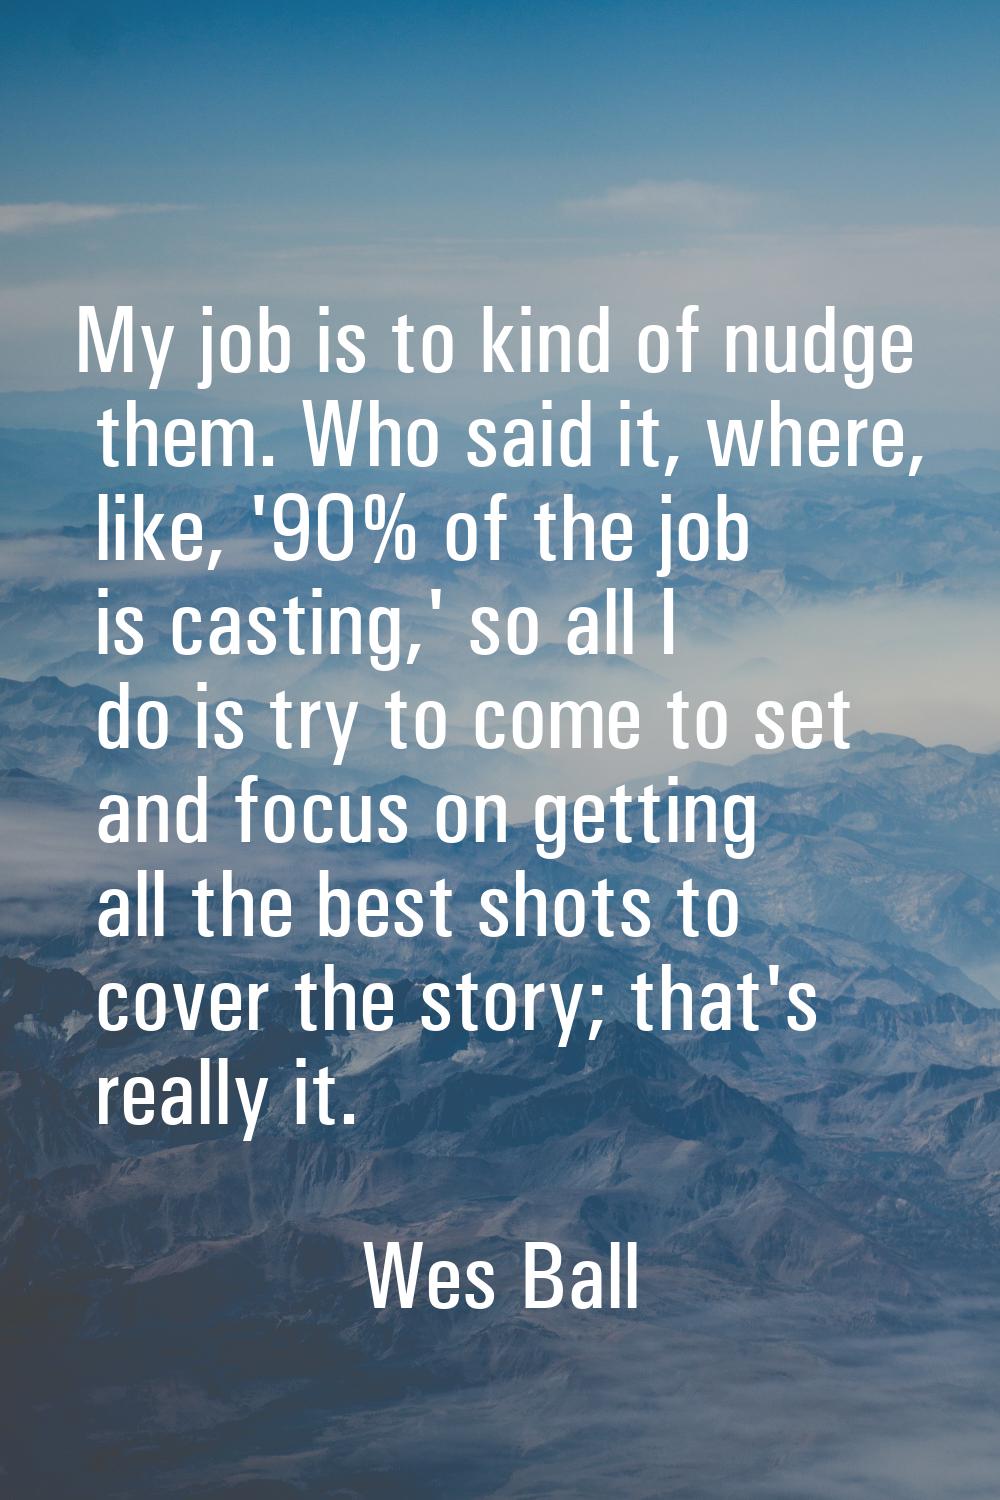 My job is to kind of nudge them. Who said it, where, like, '90% of the job is casting,' so all I do